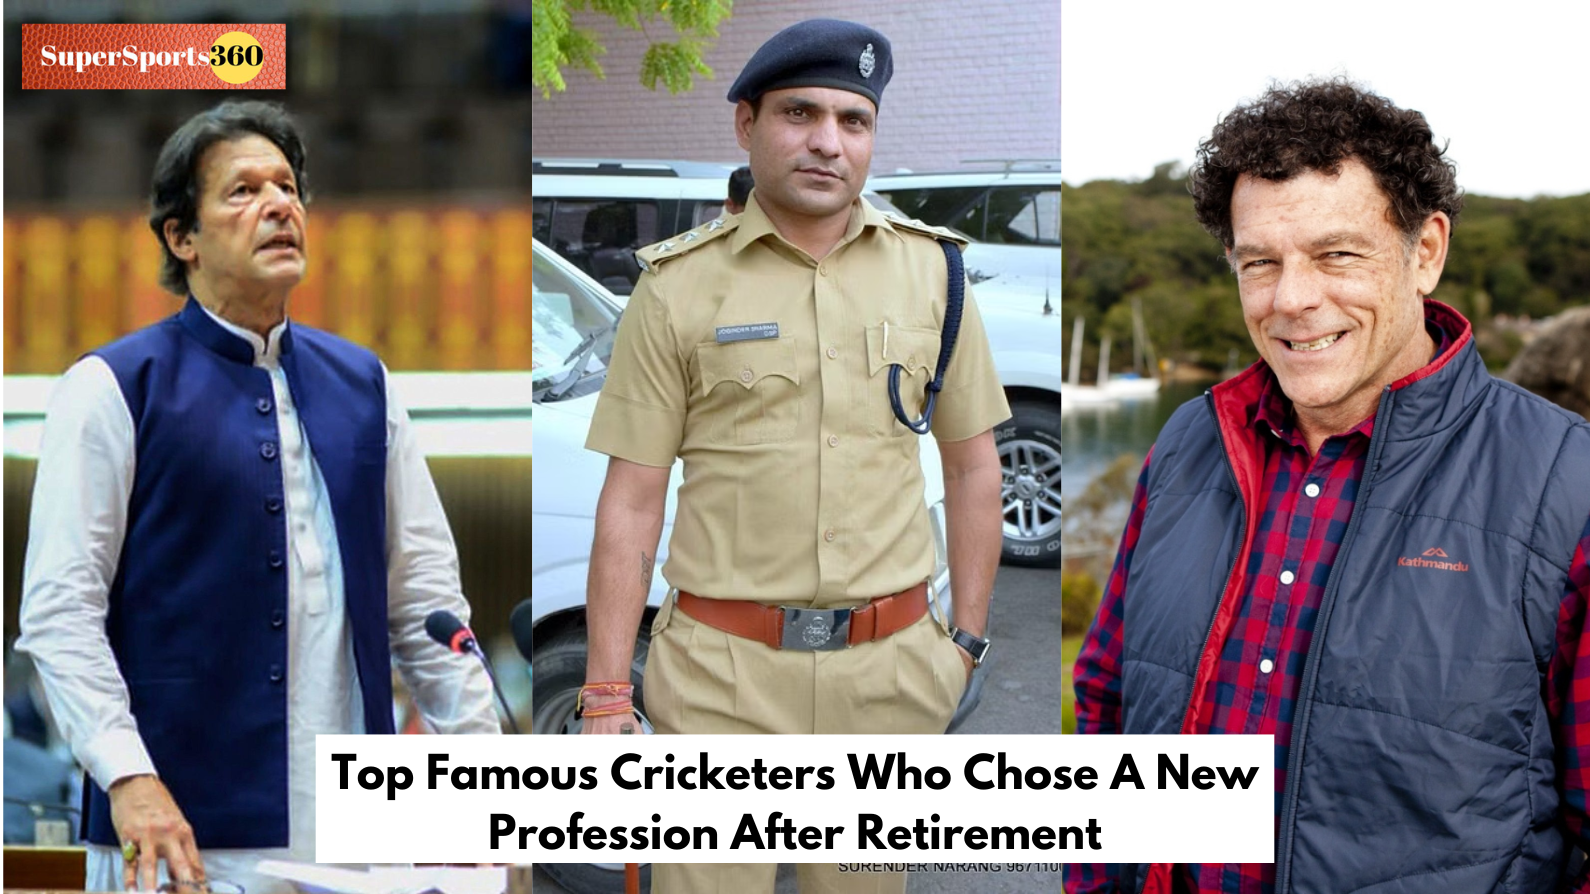 Top Famous Cricketers Who Chose A New Profession After Retirement